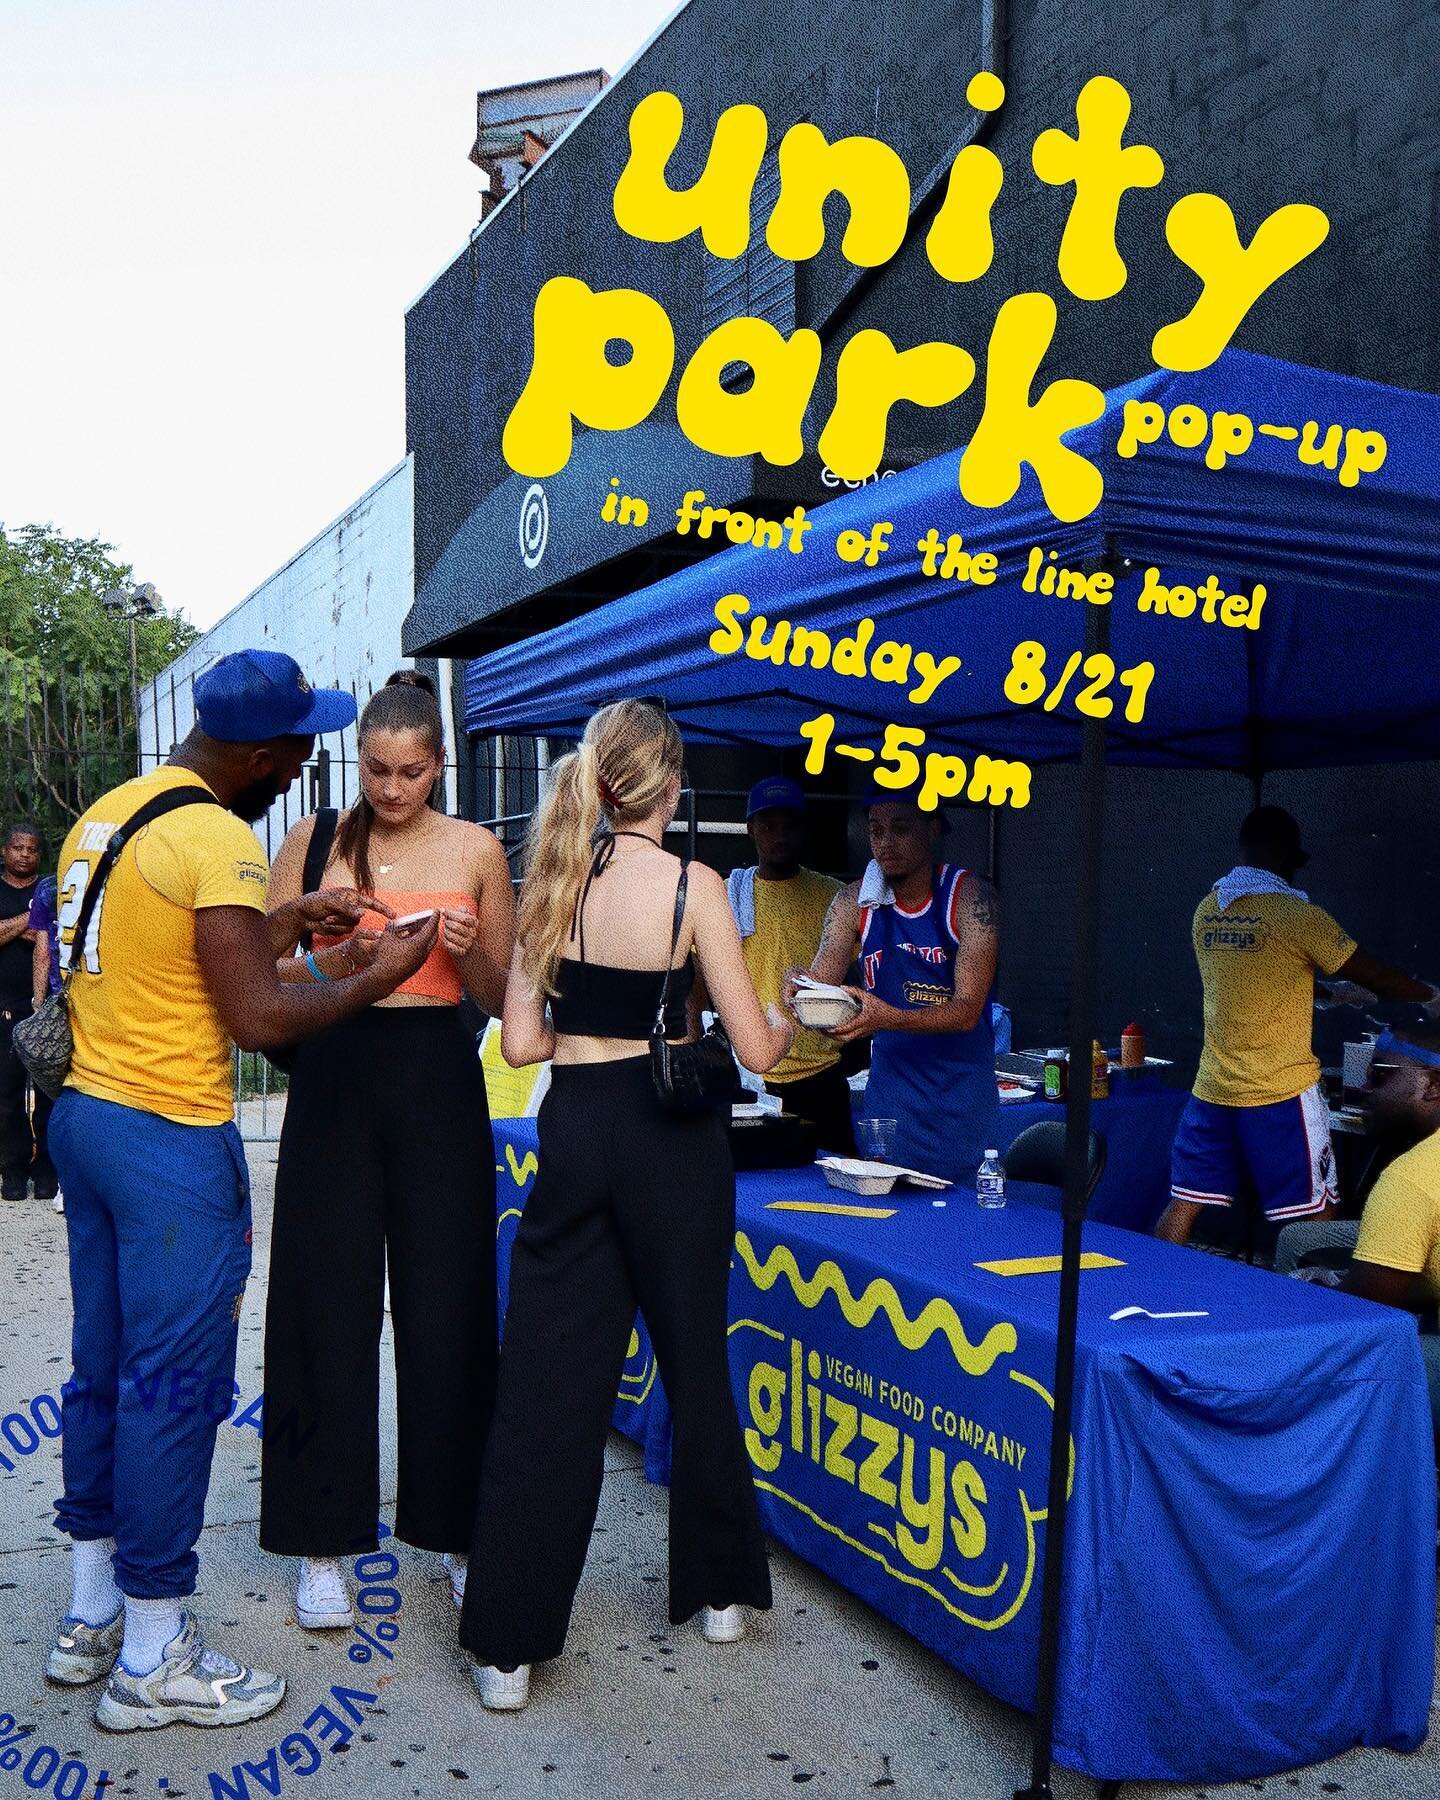 Come thru to our pop-up today at Unity Park for some glizzys! 🌭